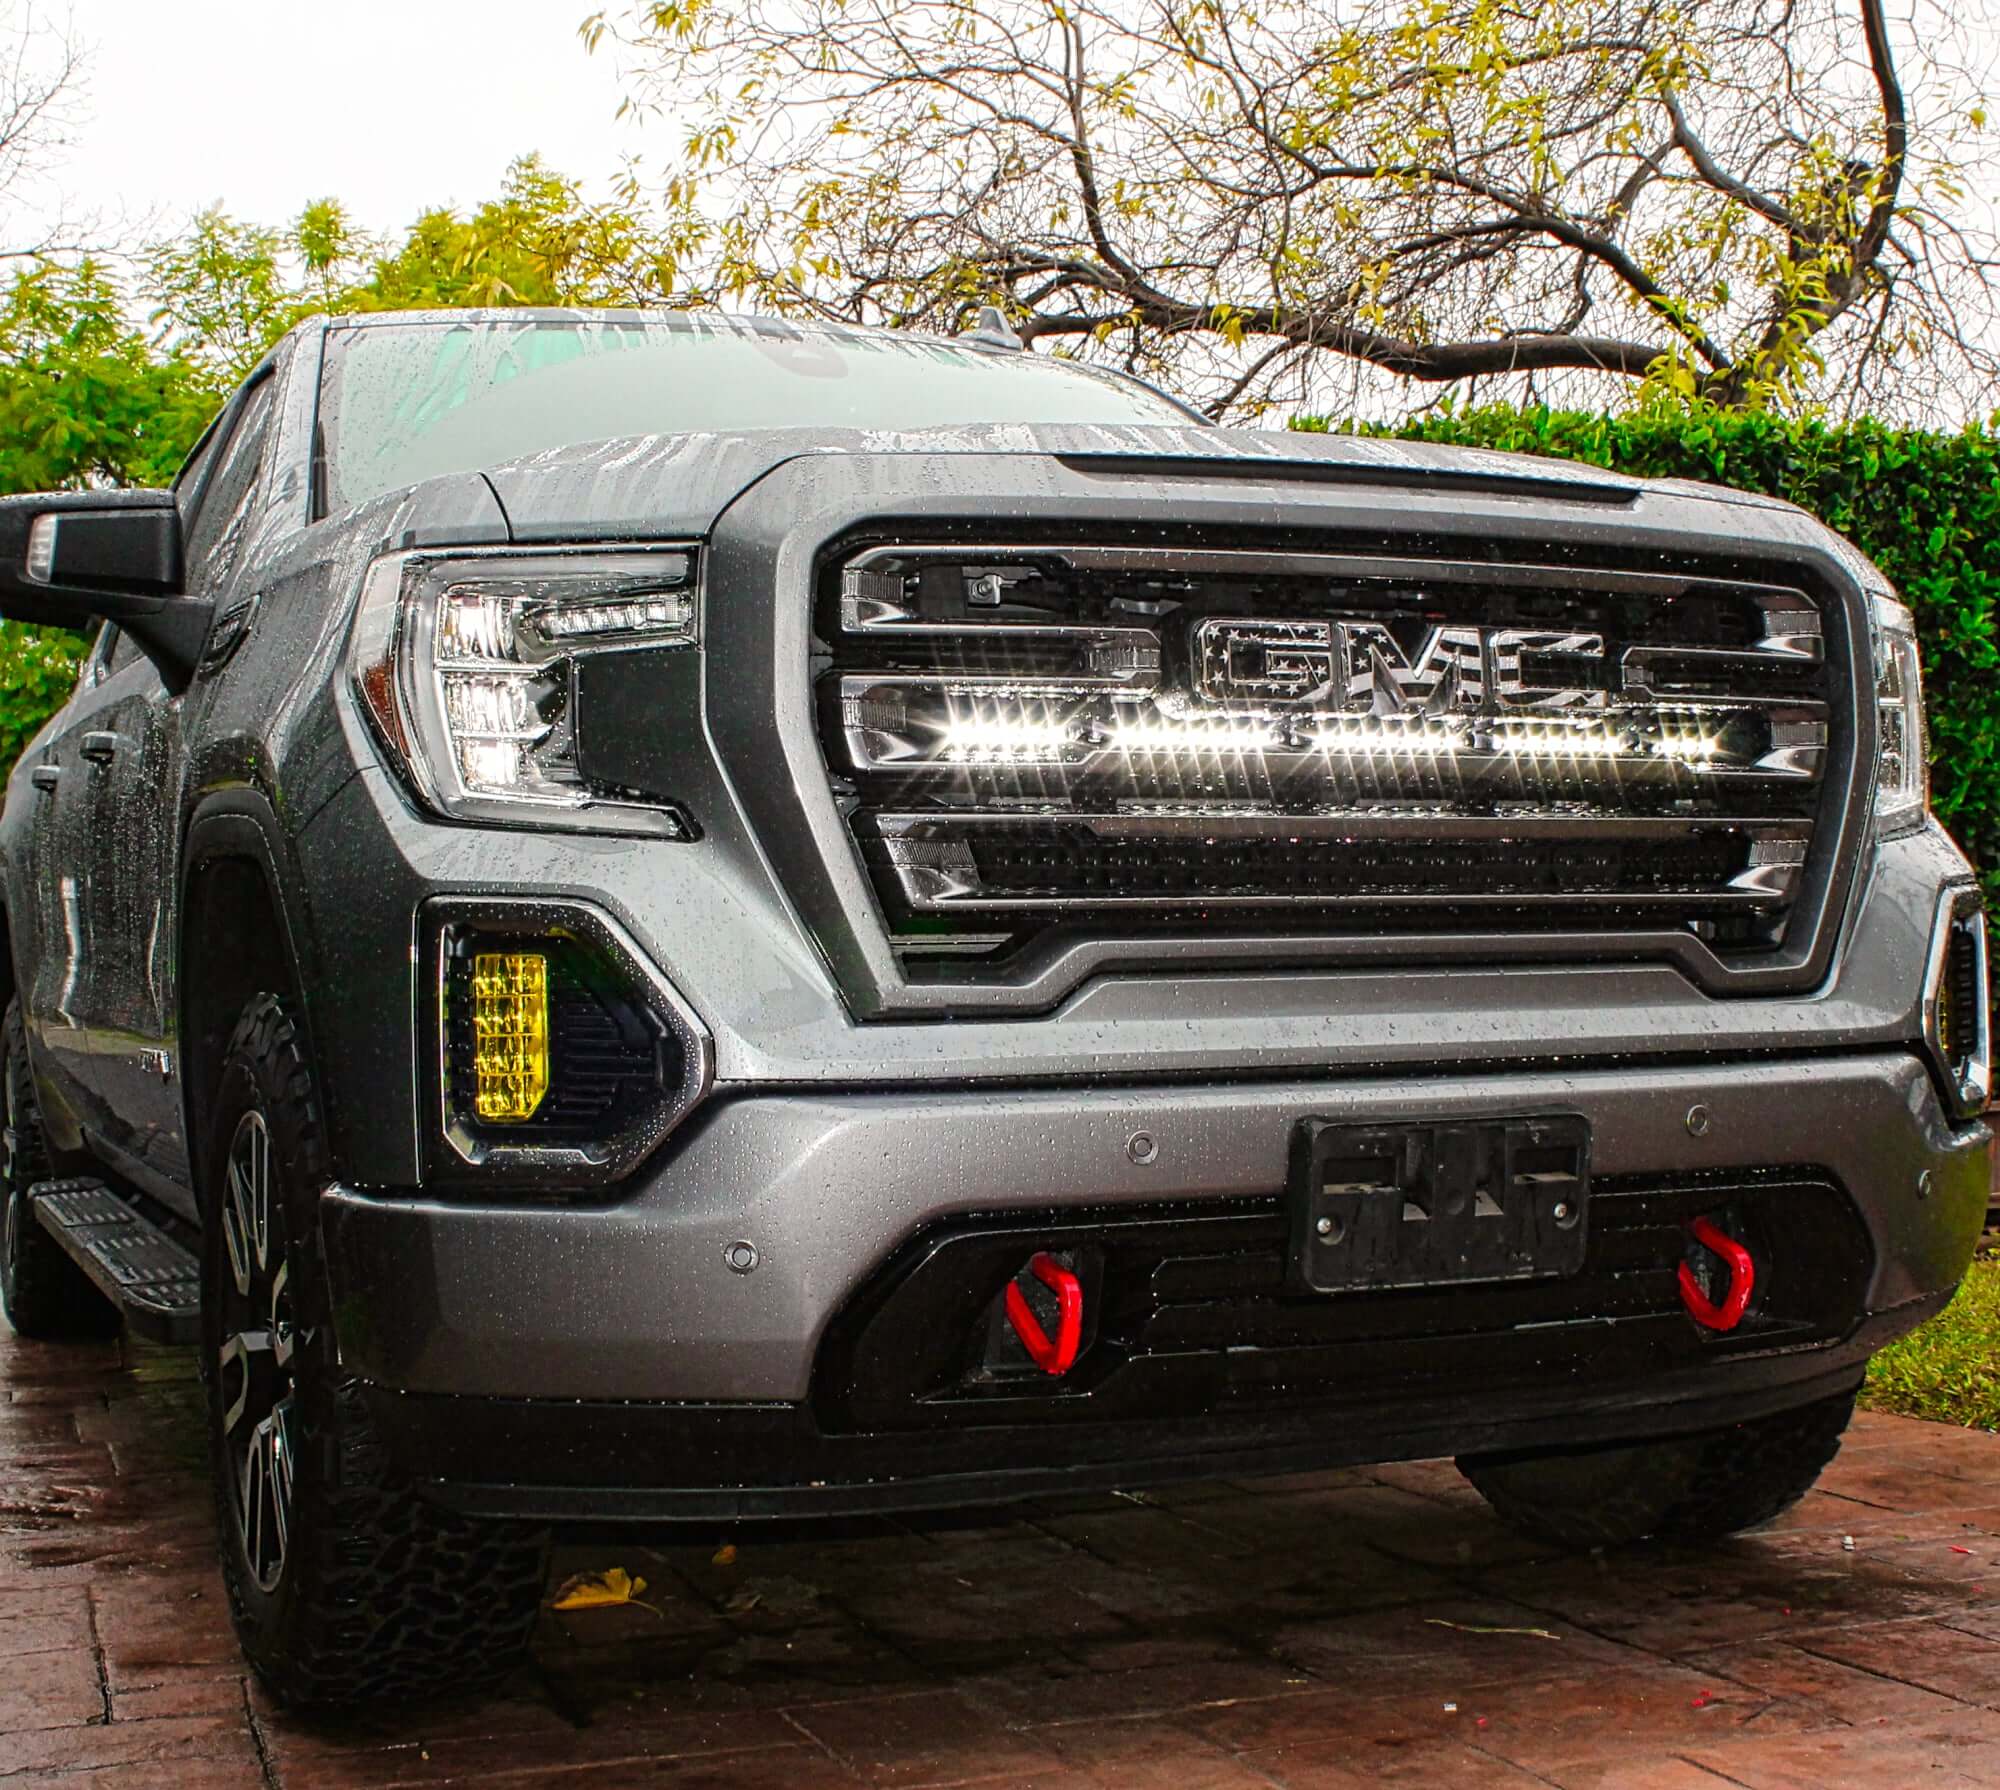 2019 2020 2021 2022 2023 gray GMC Sierra 1500 with one white 40in Light Bar behind the grille